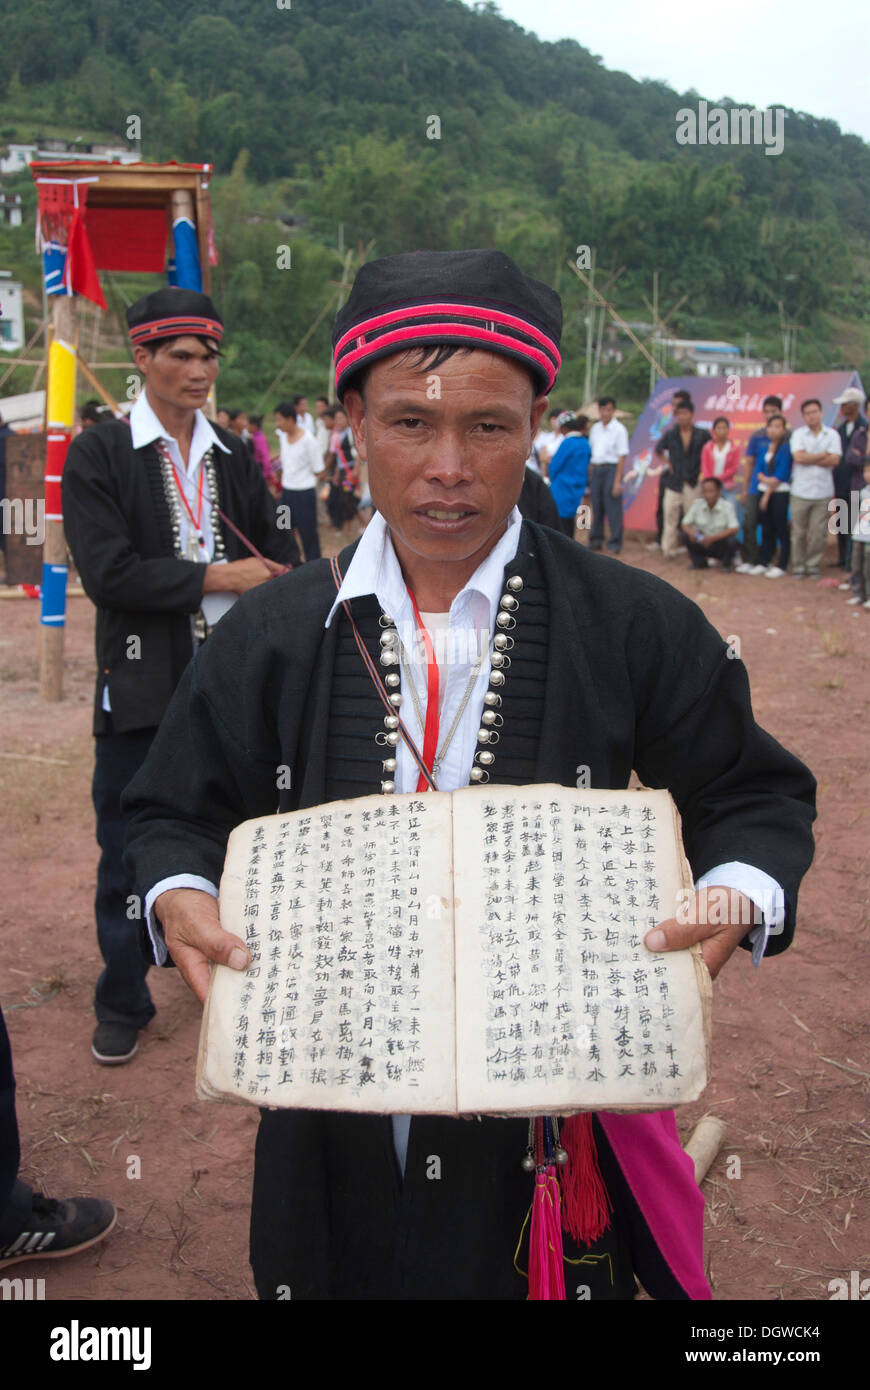 Ethnic festival, man of the Yao minority in traditional costume presenting book and writing, Jiangcheng, Pu'er City Stock Photo